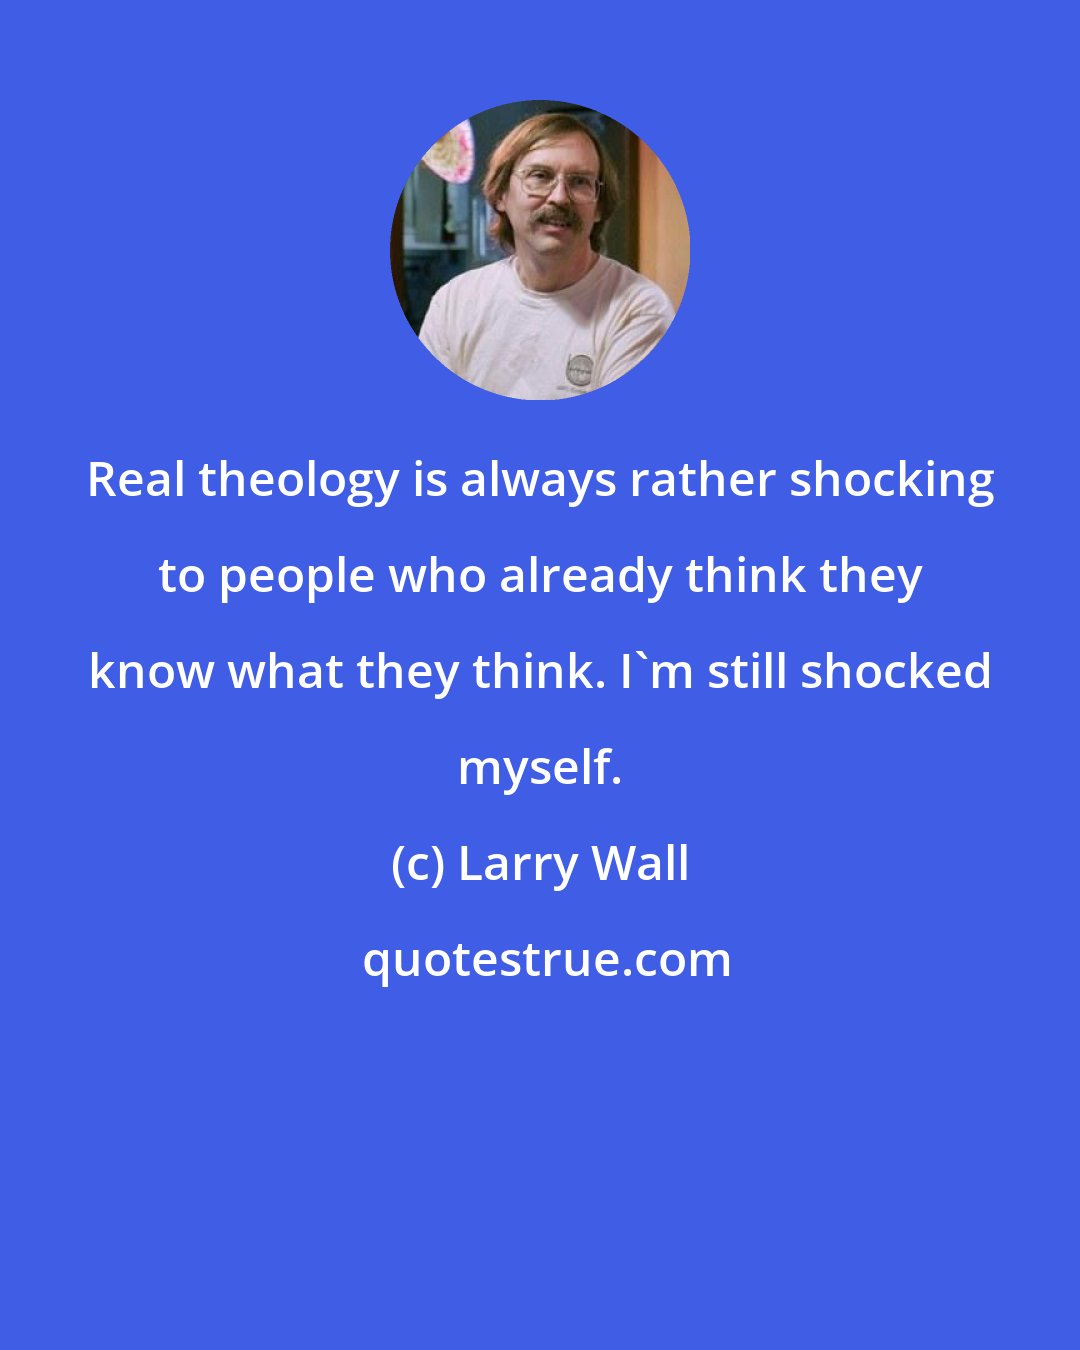 Larry Wall: Real theology is always rather shocking to people who already think they know what they think. I'm still shocked myself.